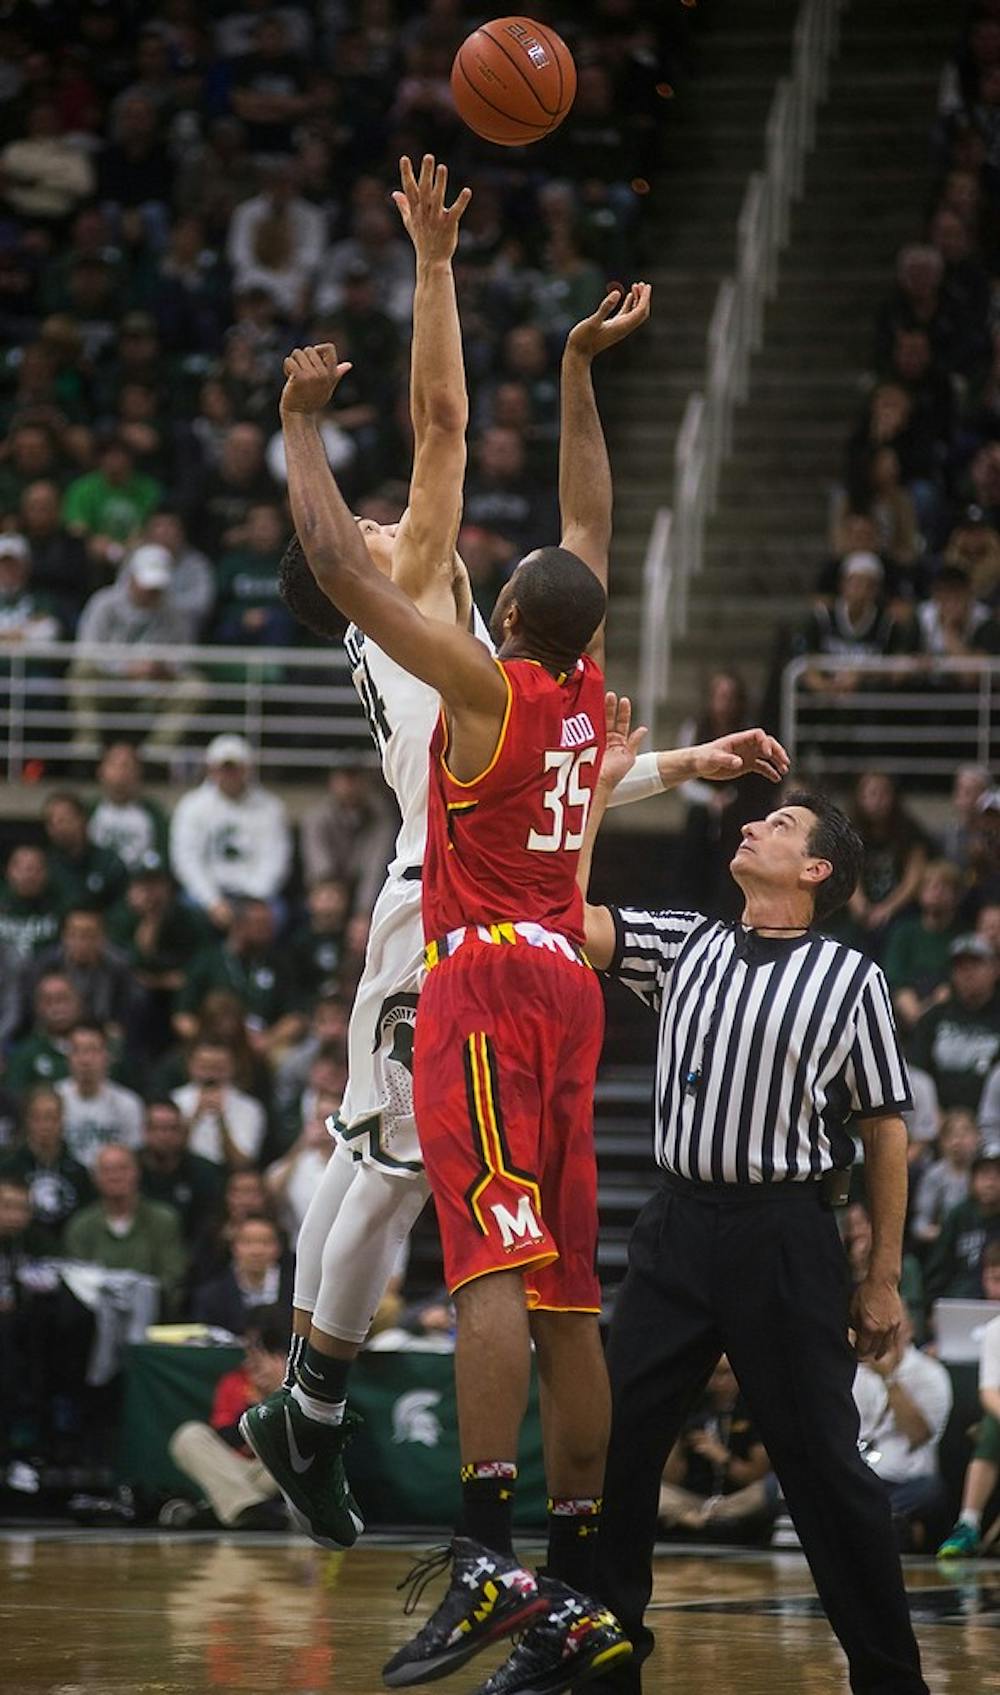 <p>Sophomore forward Gavin Schilling tips off against Maryland forward Damonte Dodd for overtime on Dec. 30, 2014, at Breslin Center. The Spartans were defeated by the Terrapins, 68-66 in double overtime. Danyelle Morrow/The State News</p>